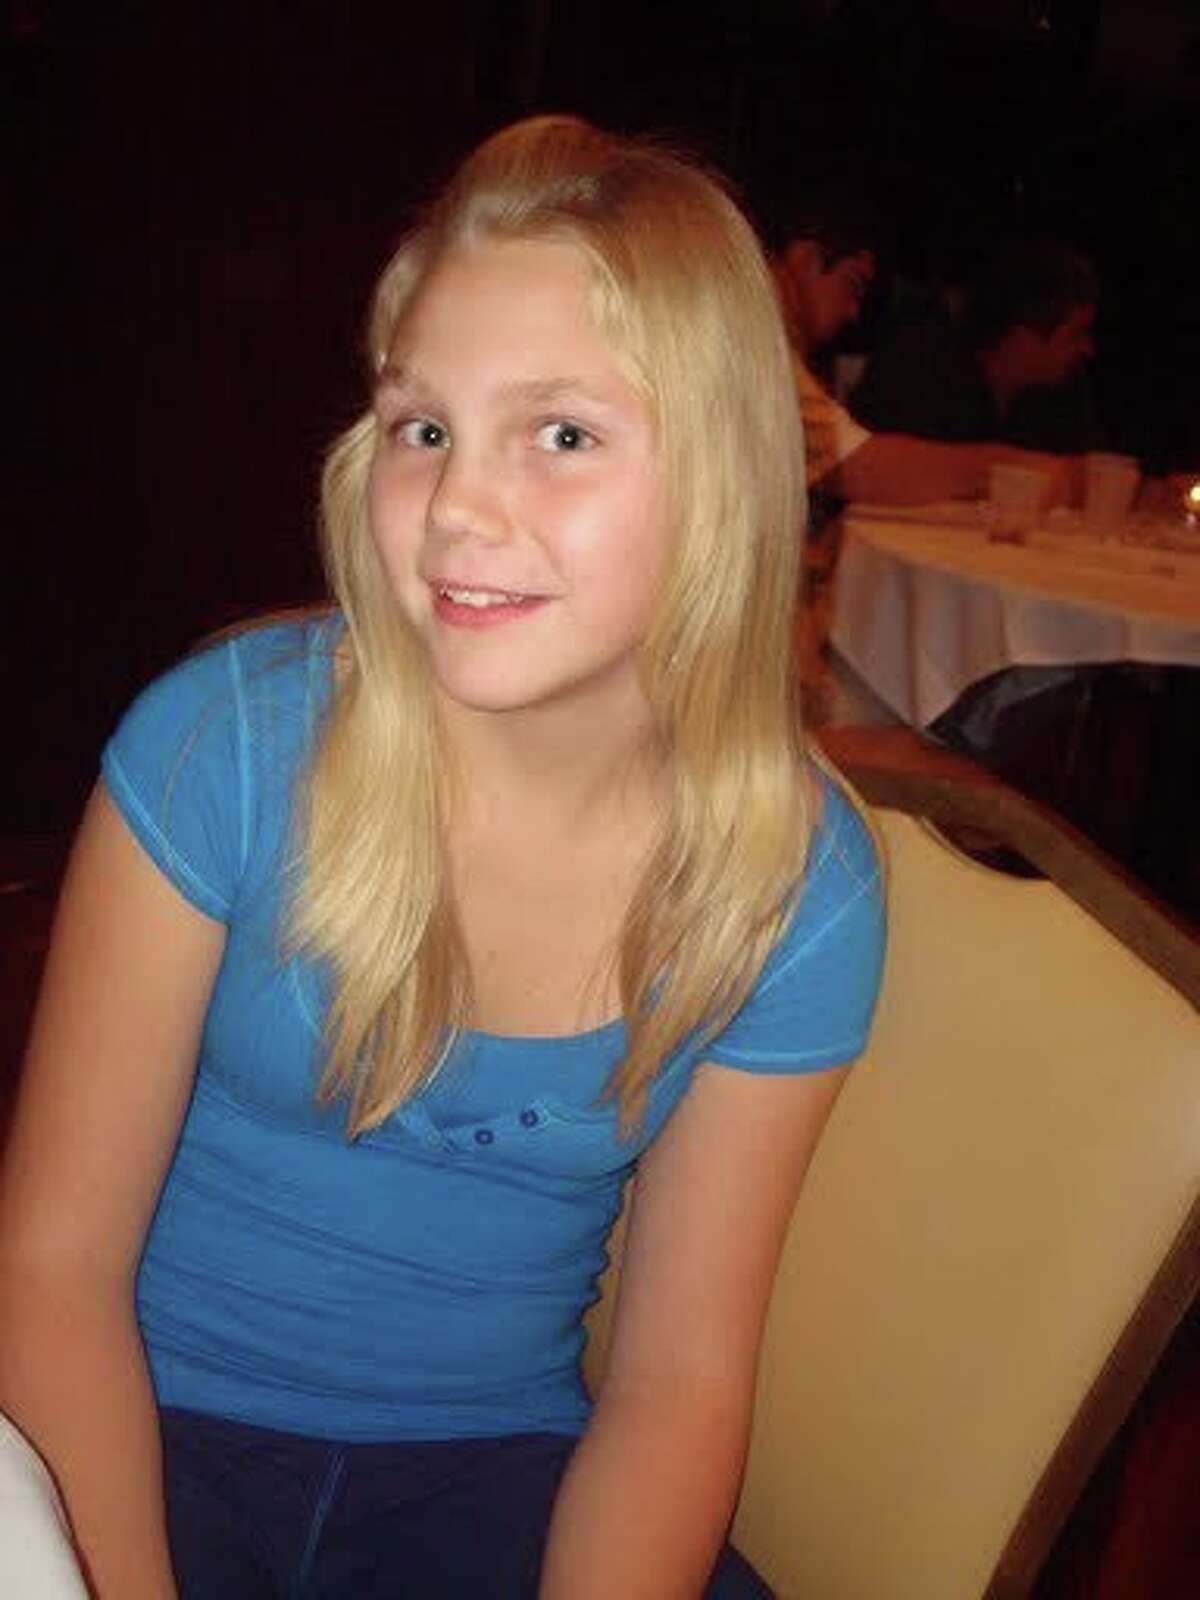 Sierra Berhaupt, 13, drowned in the swimming pool at her family's home on Thoroughbred Lane in Colonie. (Facebook)